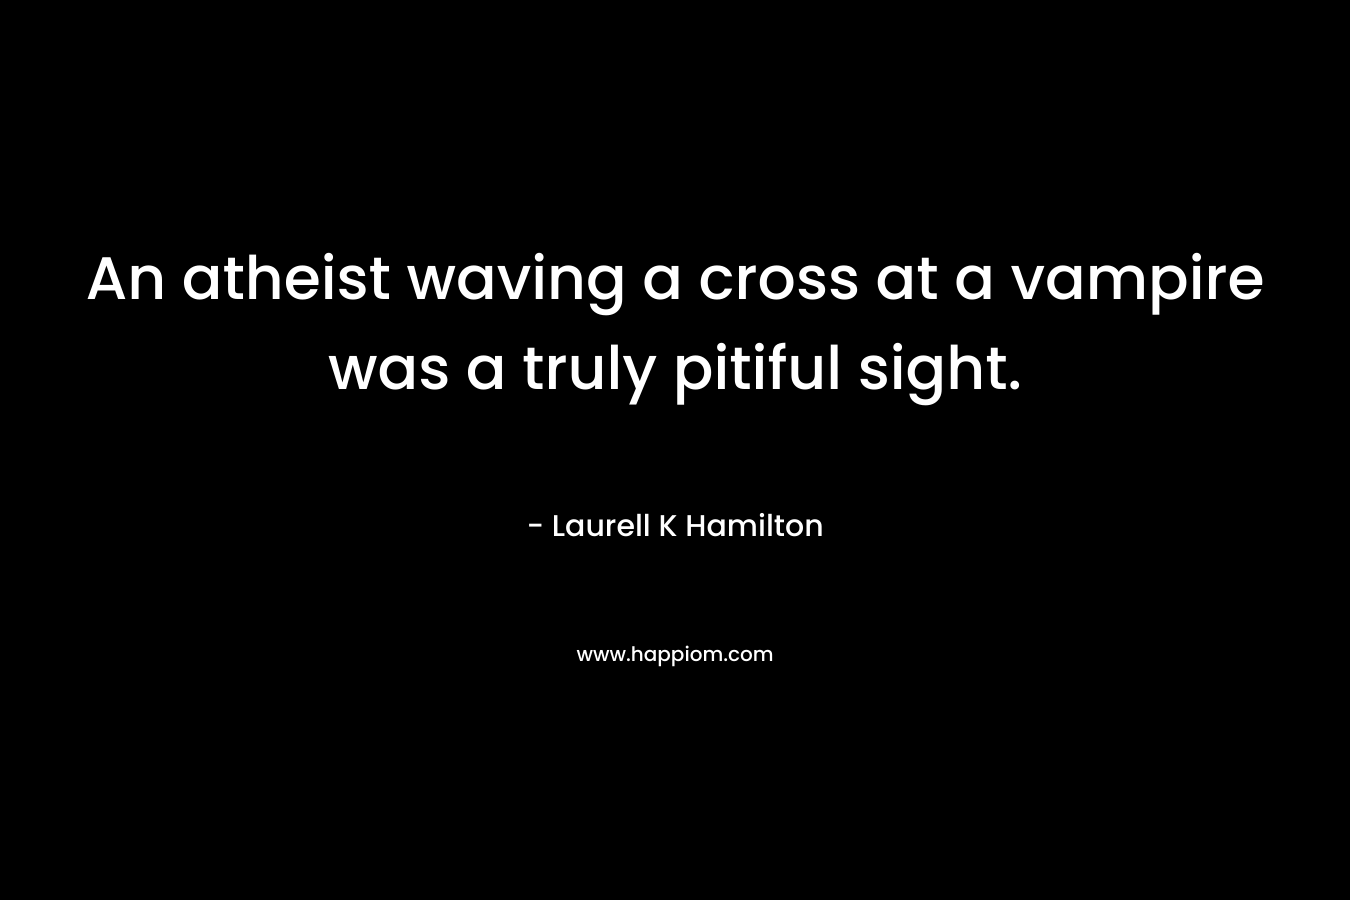 An atheist waving a cross at a vampire was a truly pitiful sight.